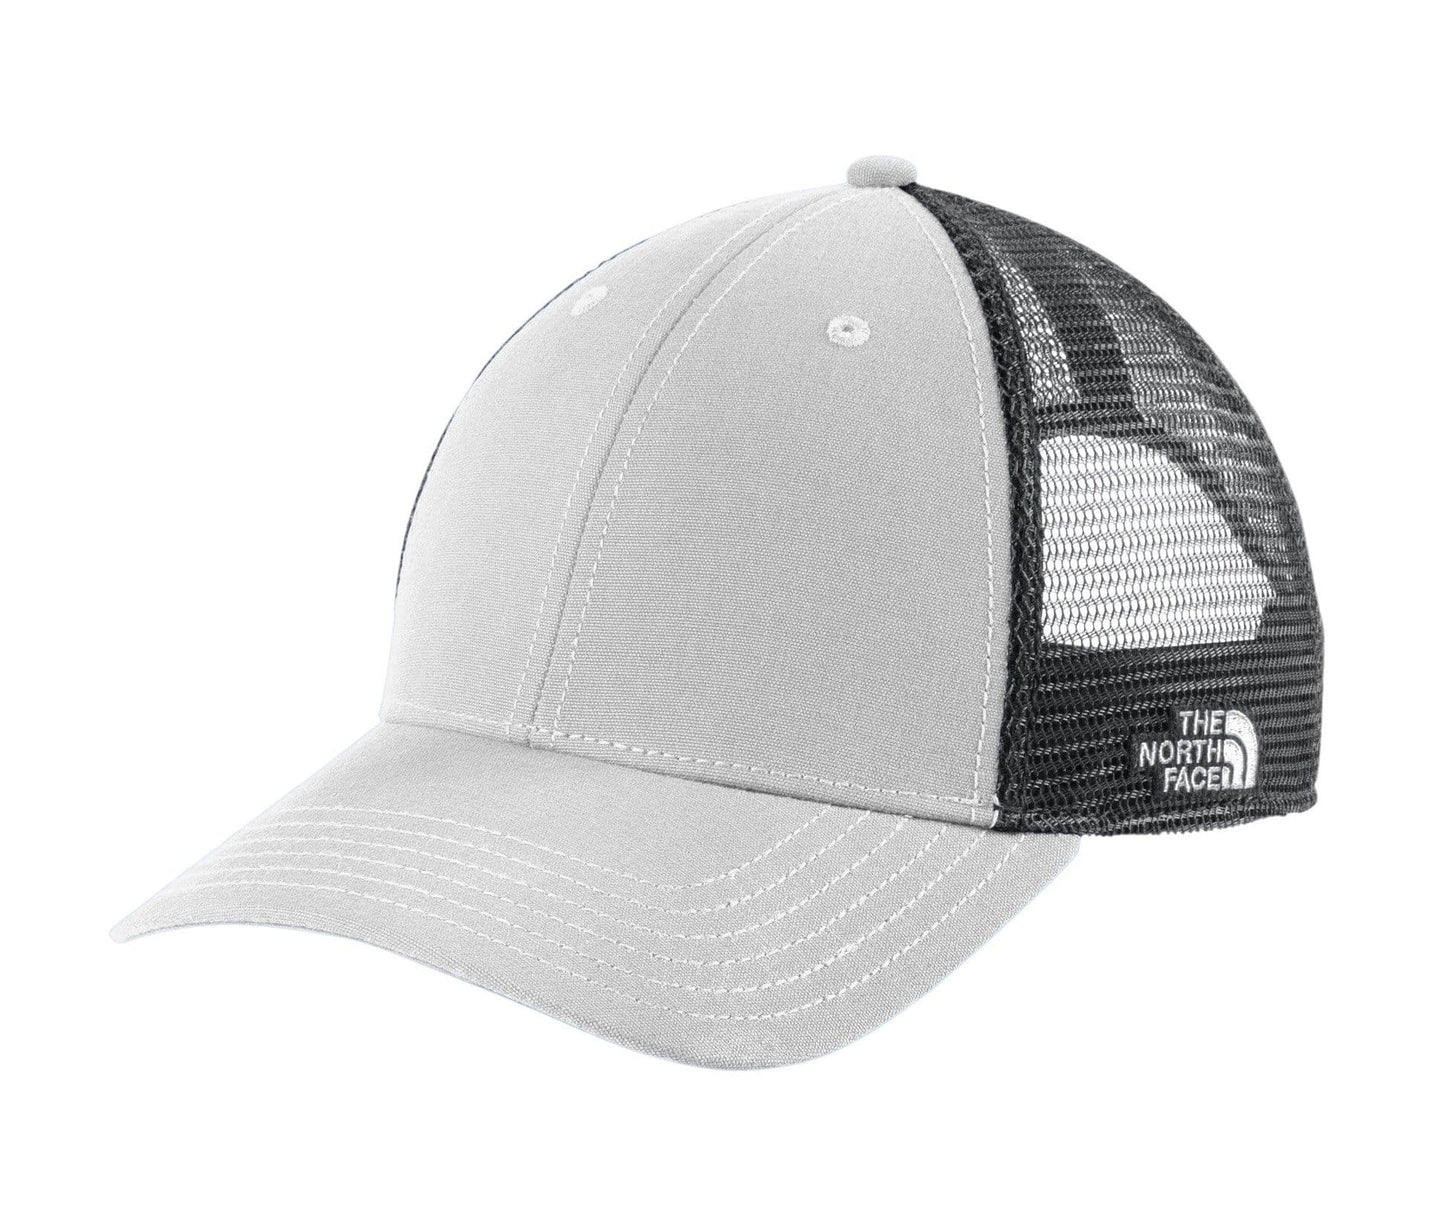 The North Face - Ultimate Trucker Cap [Logo Patch]